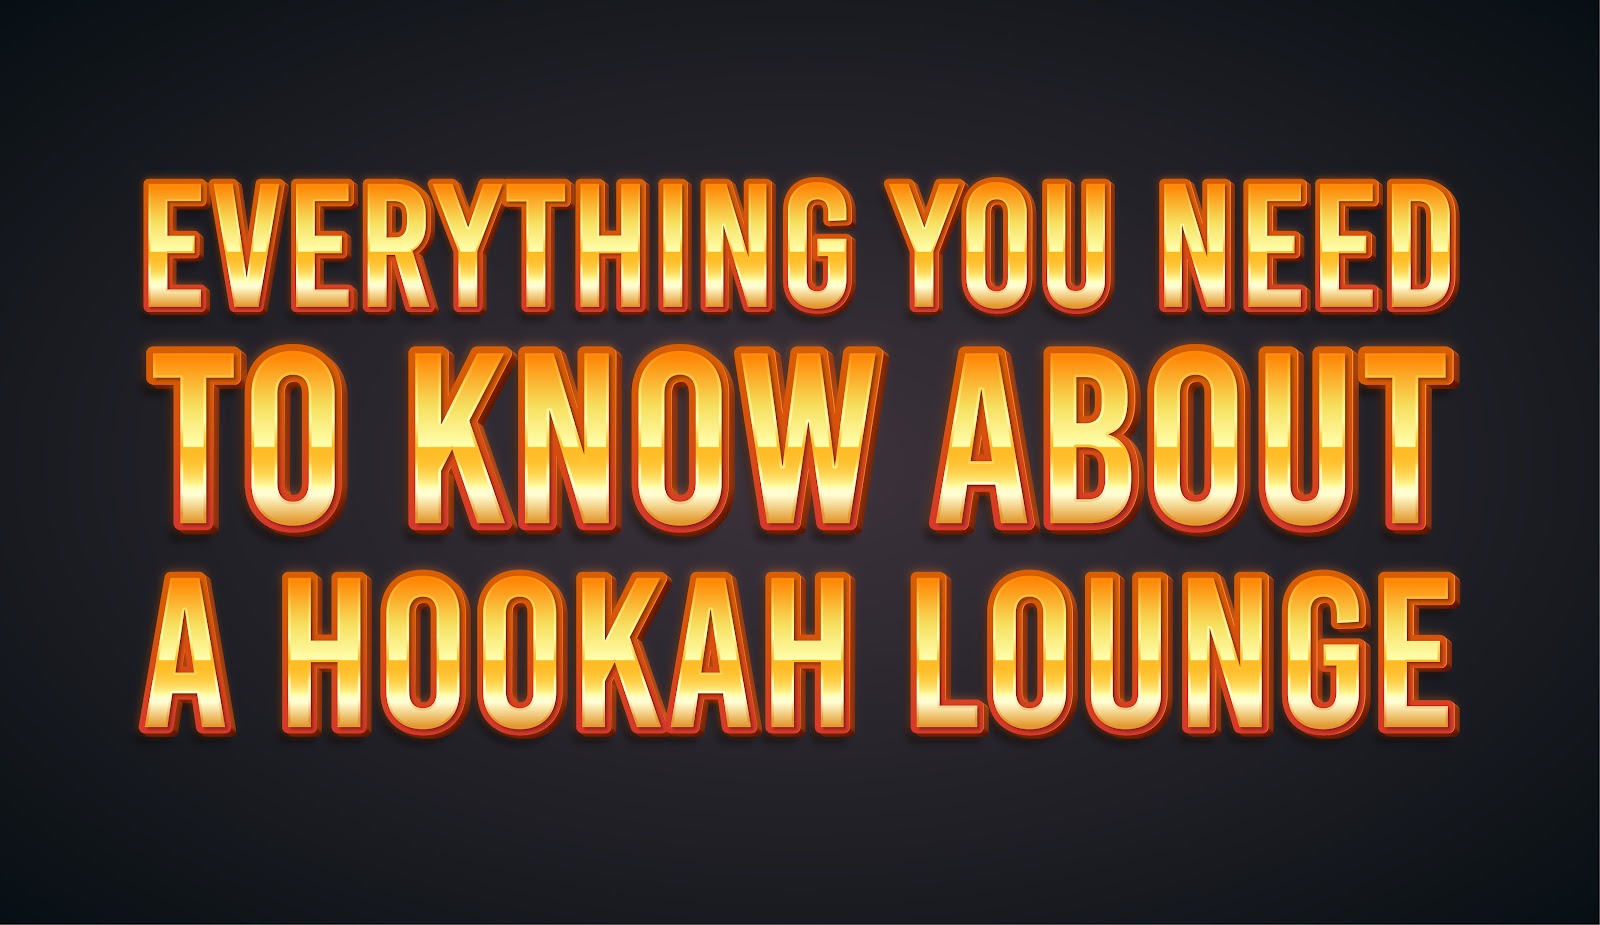 Everything You Need To Know About a Hookah Lounge